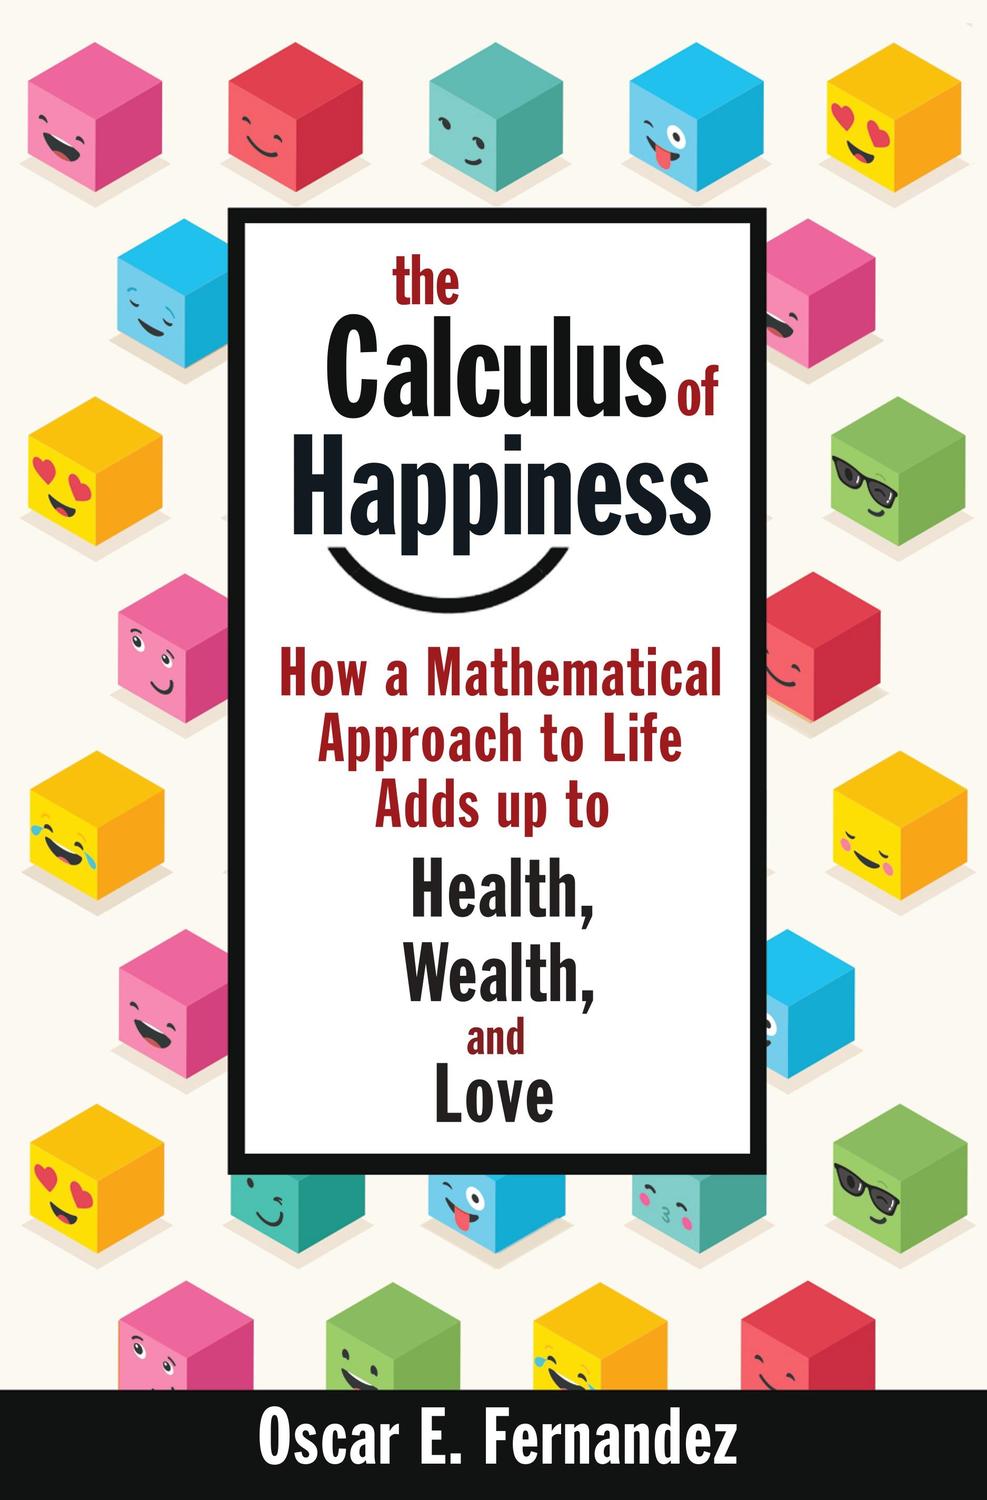 the Calculus of Happiness book sleeve